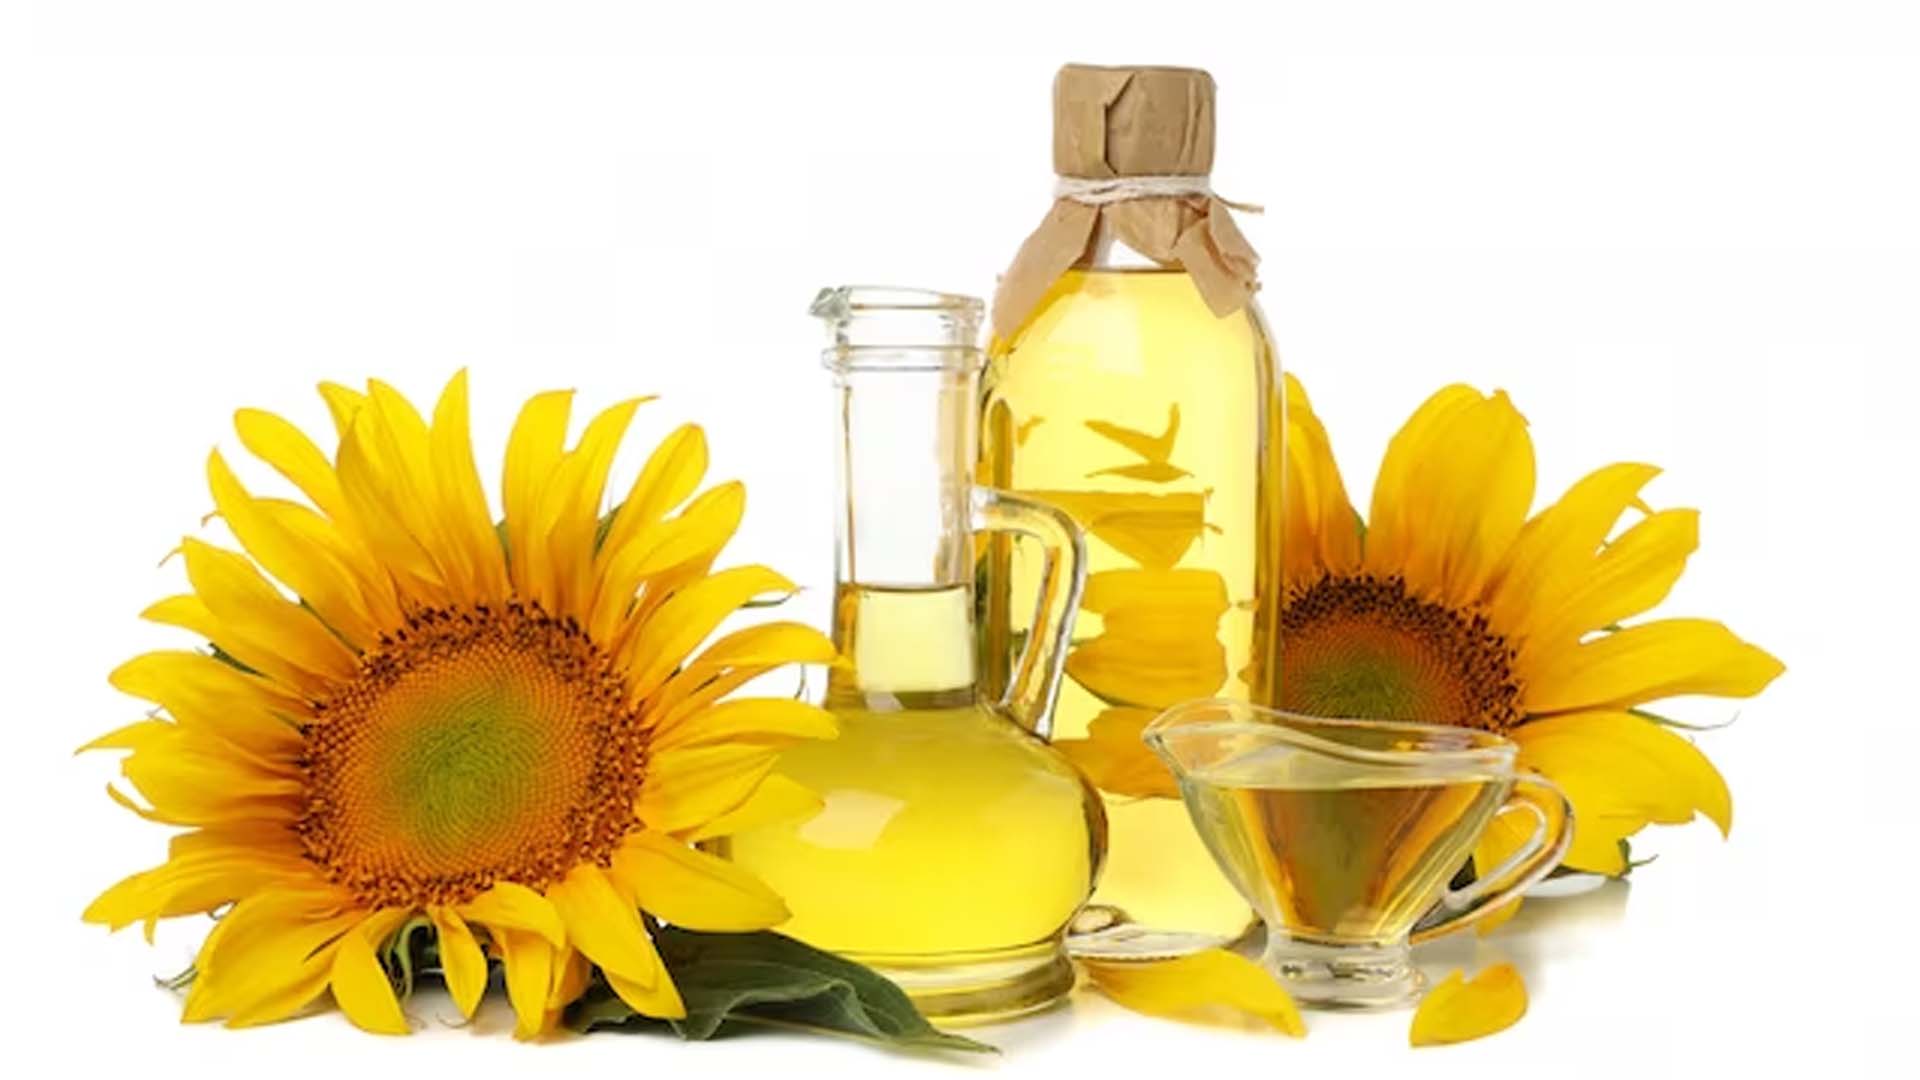 Nutritional facts of Sunflower Oil